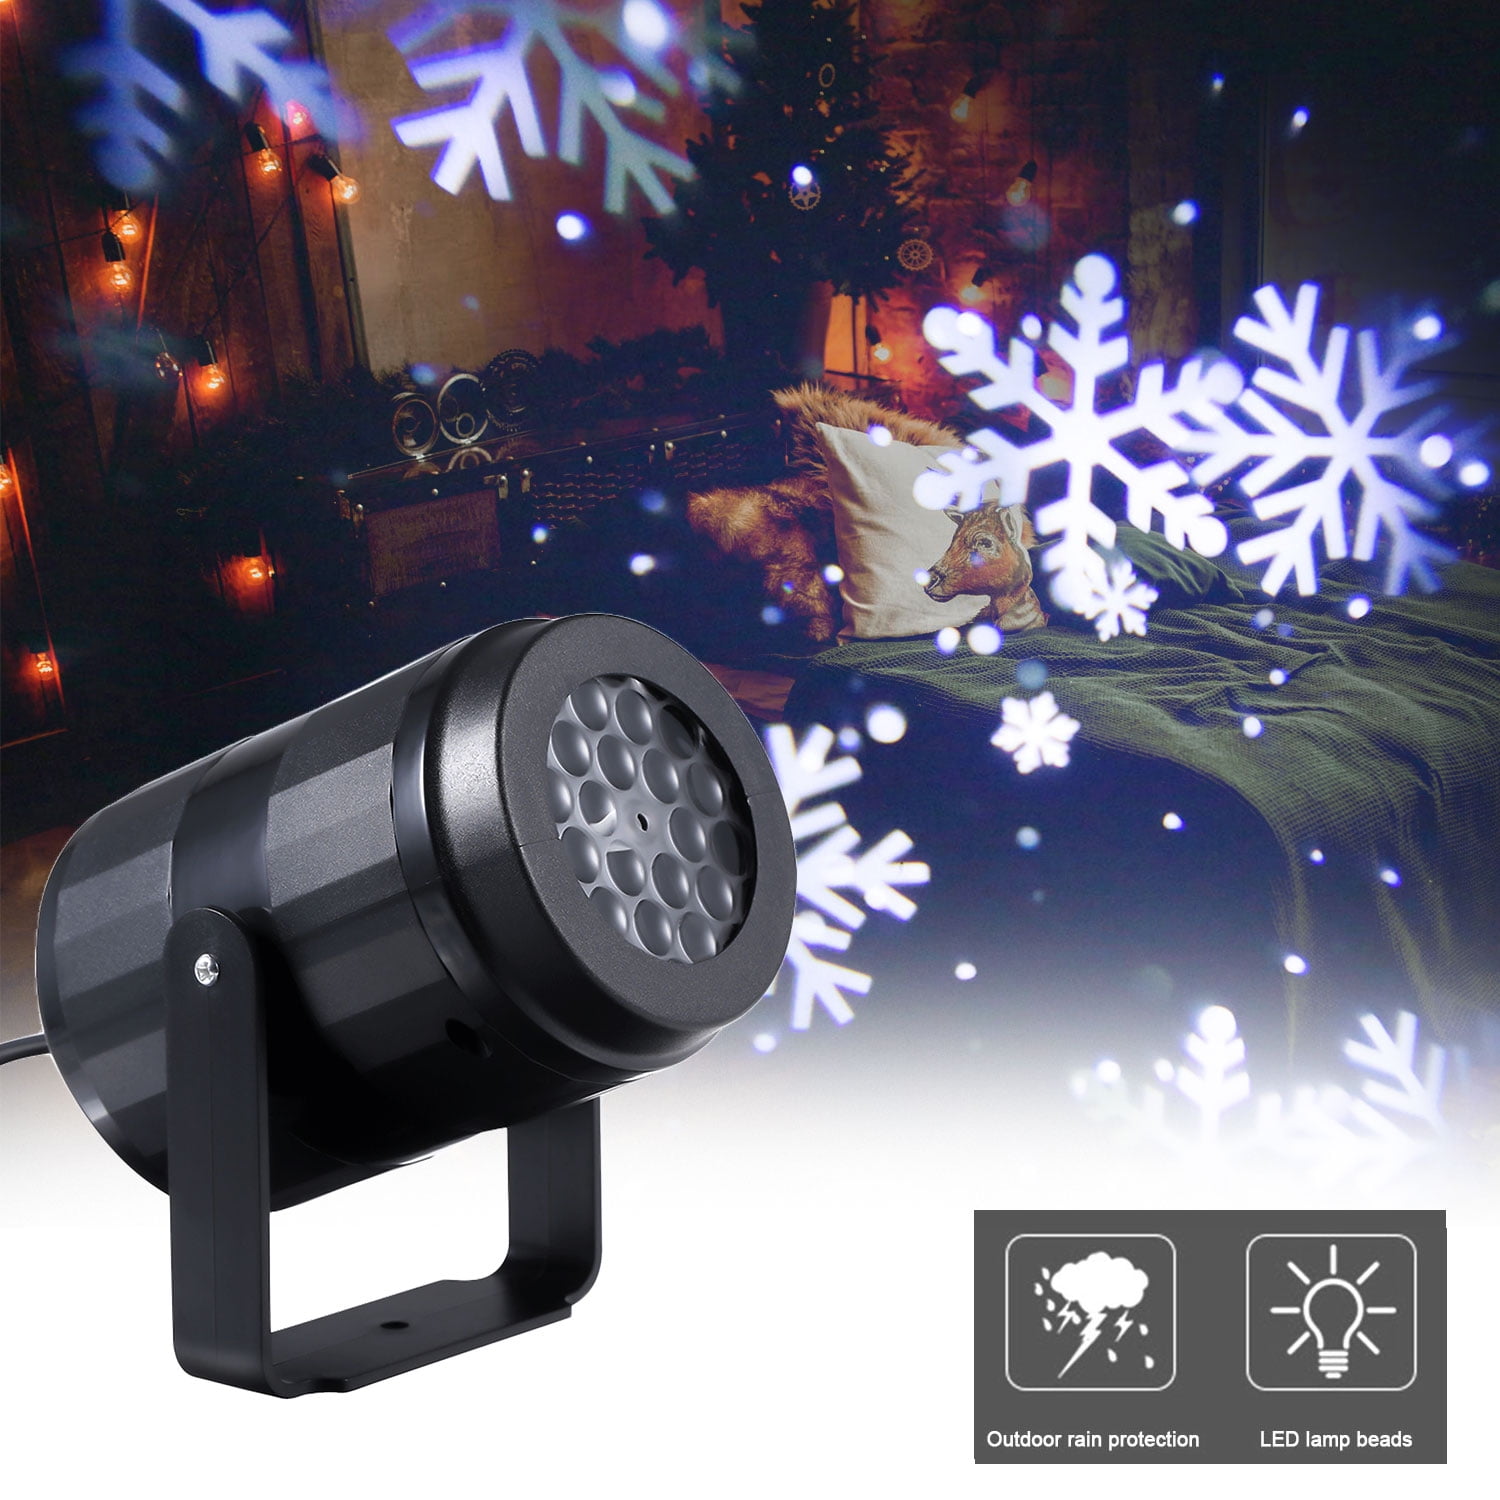 12W LED Projector Lamp Laser Auto Rotating Stage Light Christmas Party Landscape 